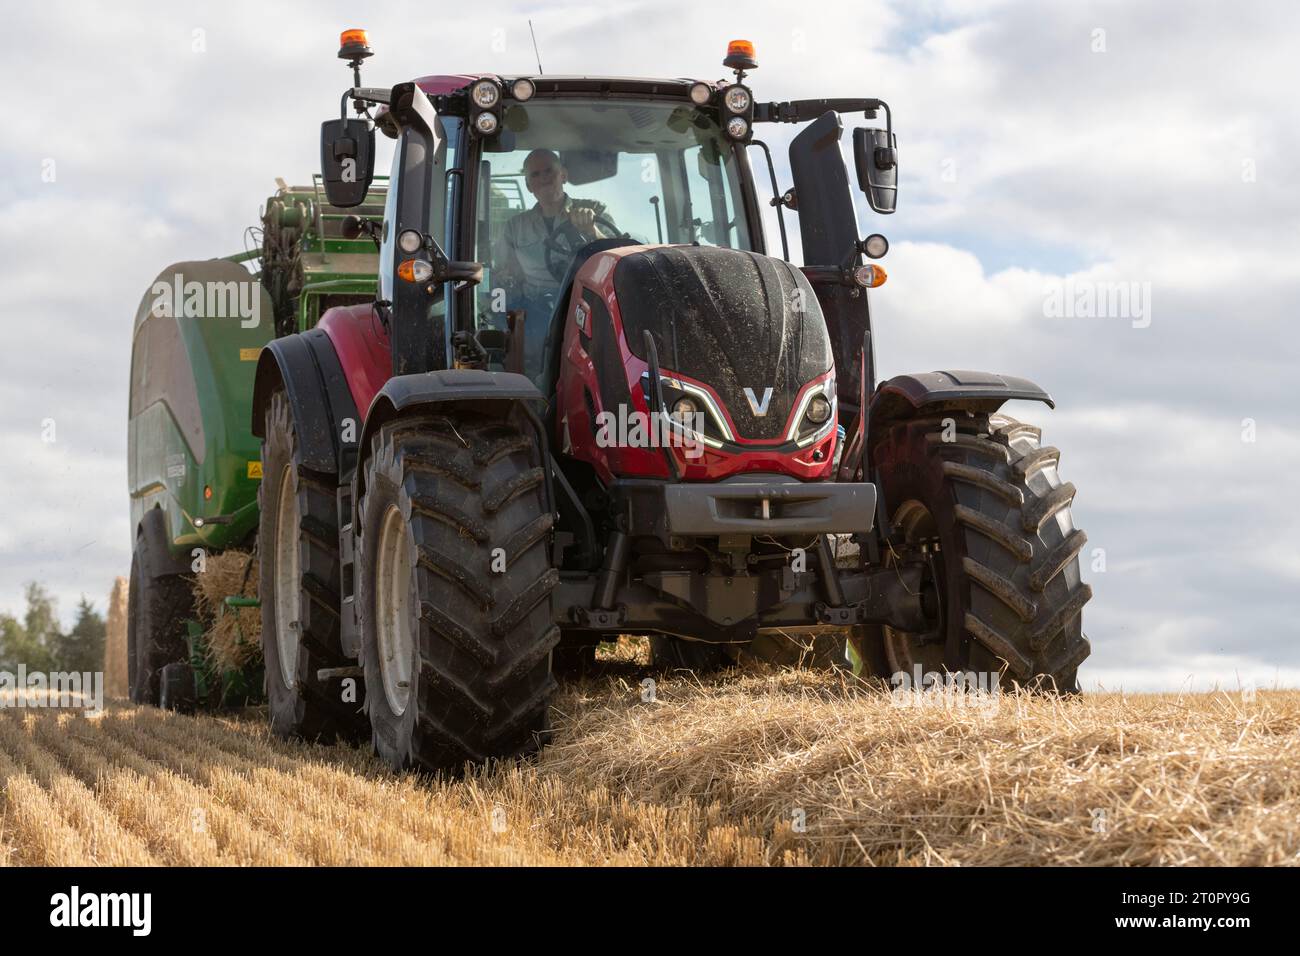 A Red t195 Valtra Tractor Towing a Baler in a Field of Barley Straw Seen From the Front and a Low Viewpoint Stock Photo